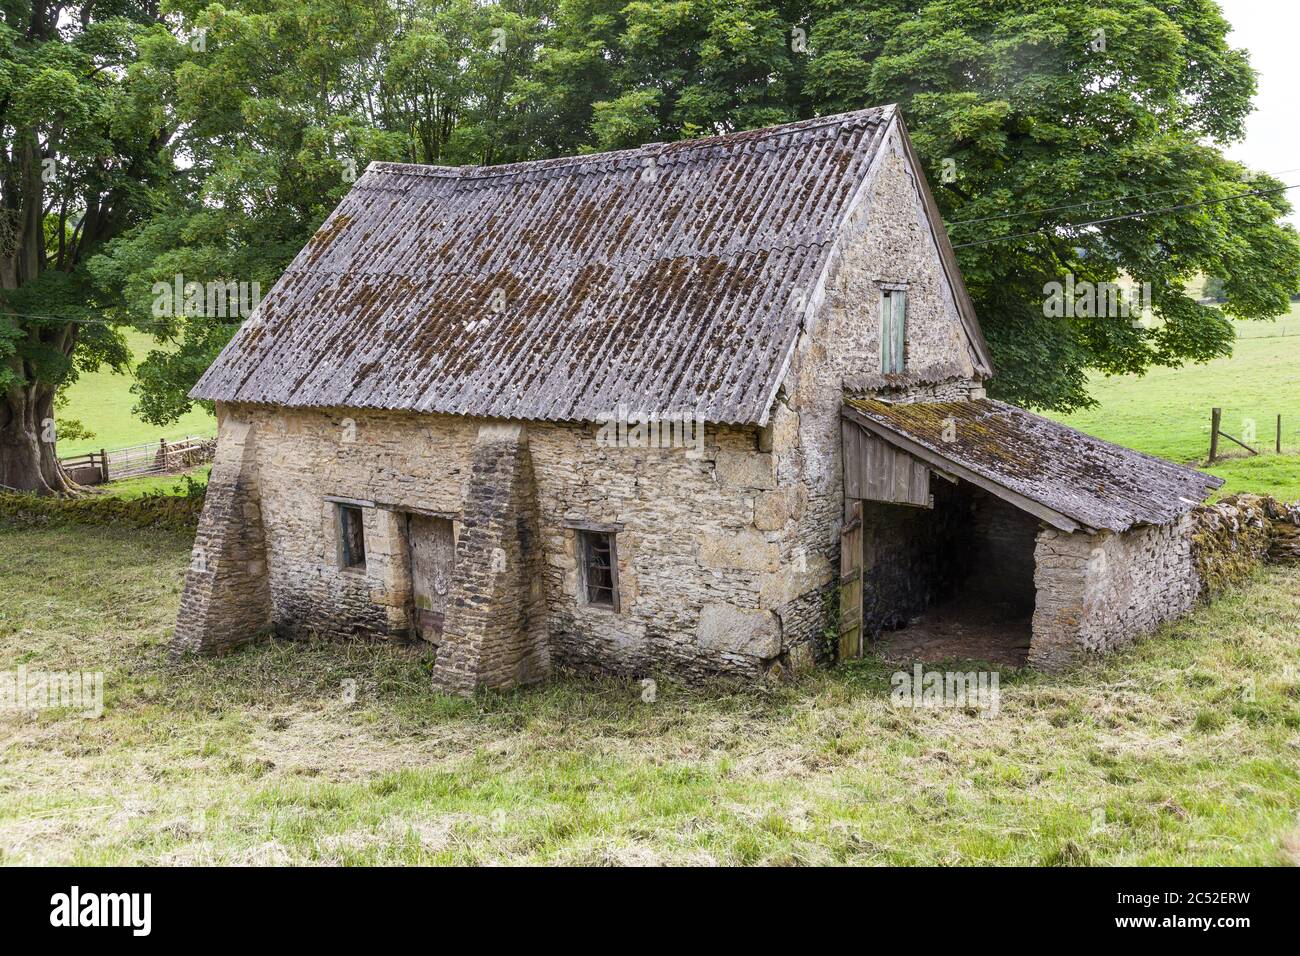 An old stone barn near the Cotswold village of Snowshill, Gloucestershire UK Stock Photo